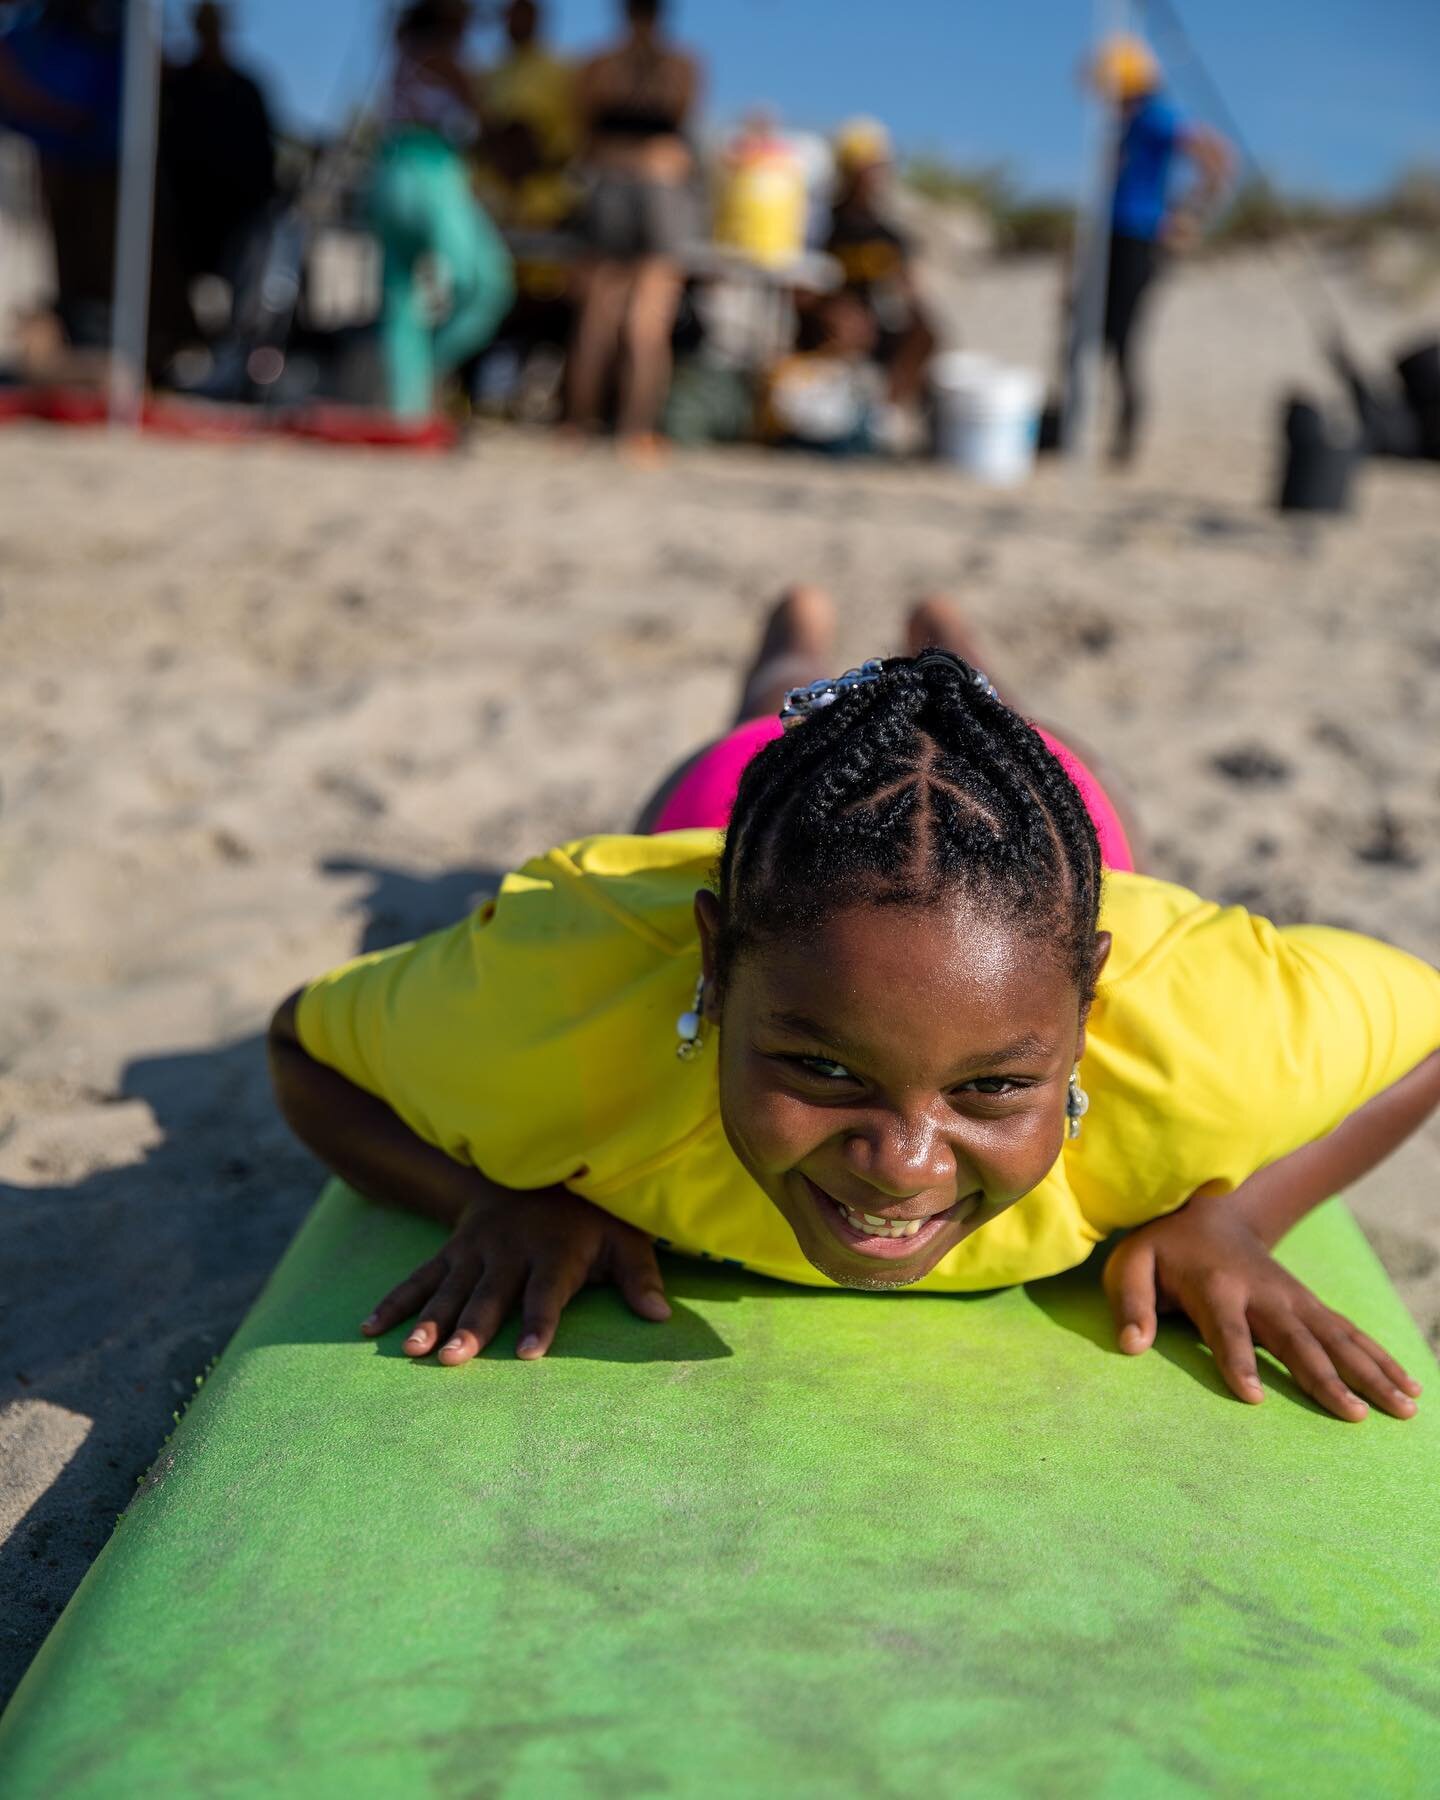 Our mentees' excitement for our upcoming surf camp is C O N T A G I O U S! 

1 DAY LEFT to our Summer Kickoff fundraiser! We&rsquo;re at 33% of reaching our fundraising goal of $35,000.

Last year, we provided FREE surf lessons to over 130 MENTEES th